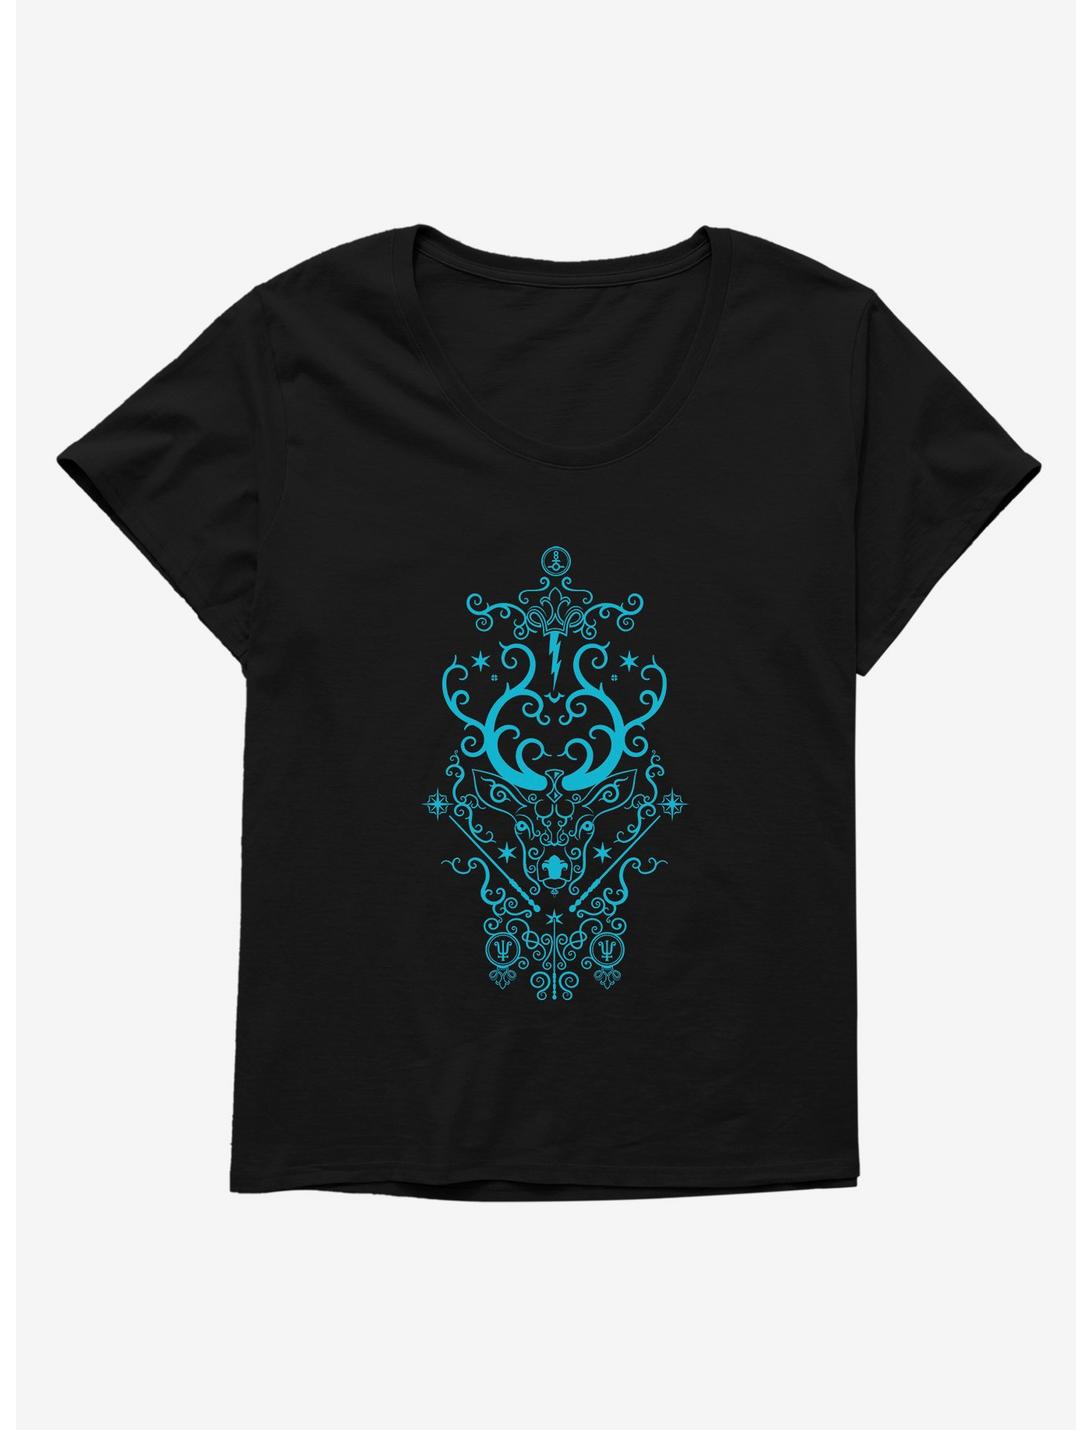 Harry Potter Stag Patronus Abstract Womens T-Shirt Plus Size, , hi-res